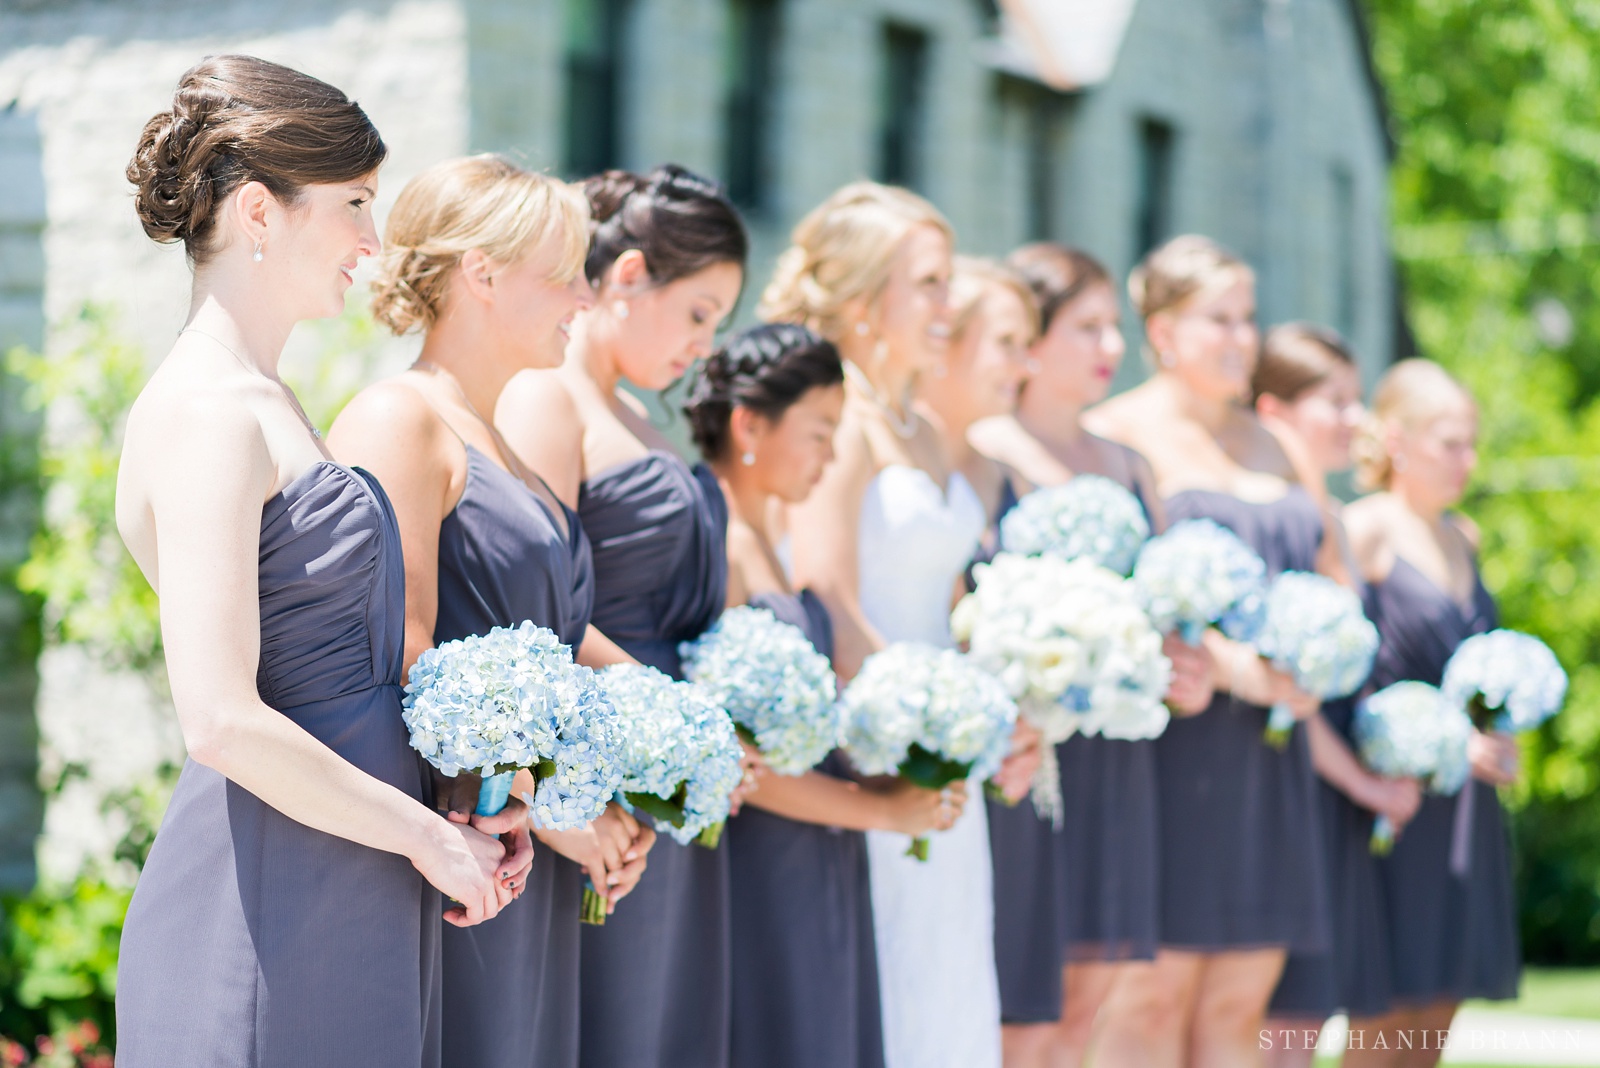 up-close-of-a-row-of-bridesmaids-bouquets